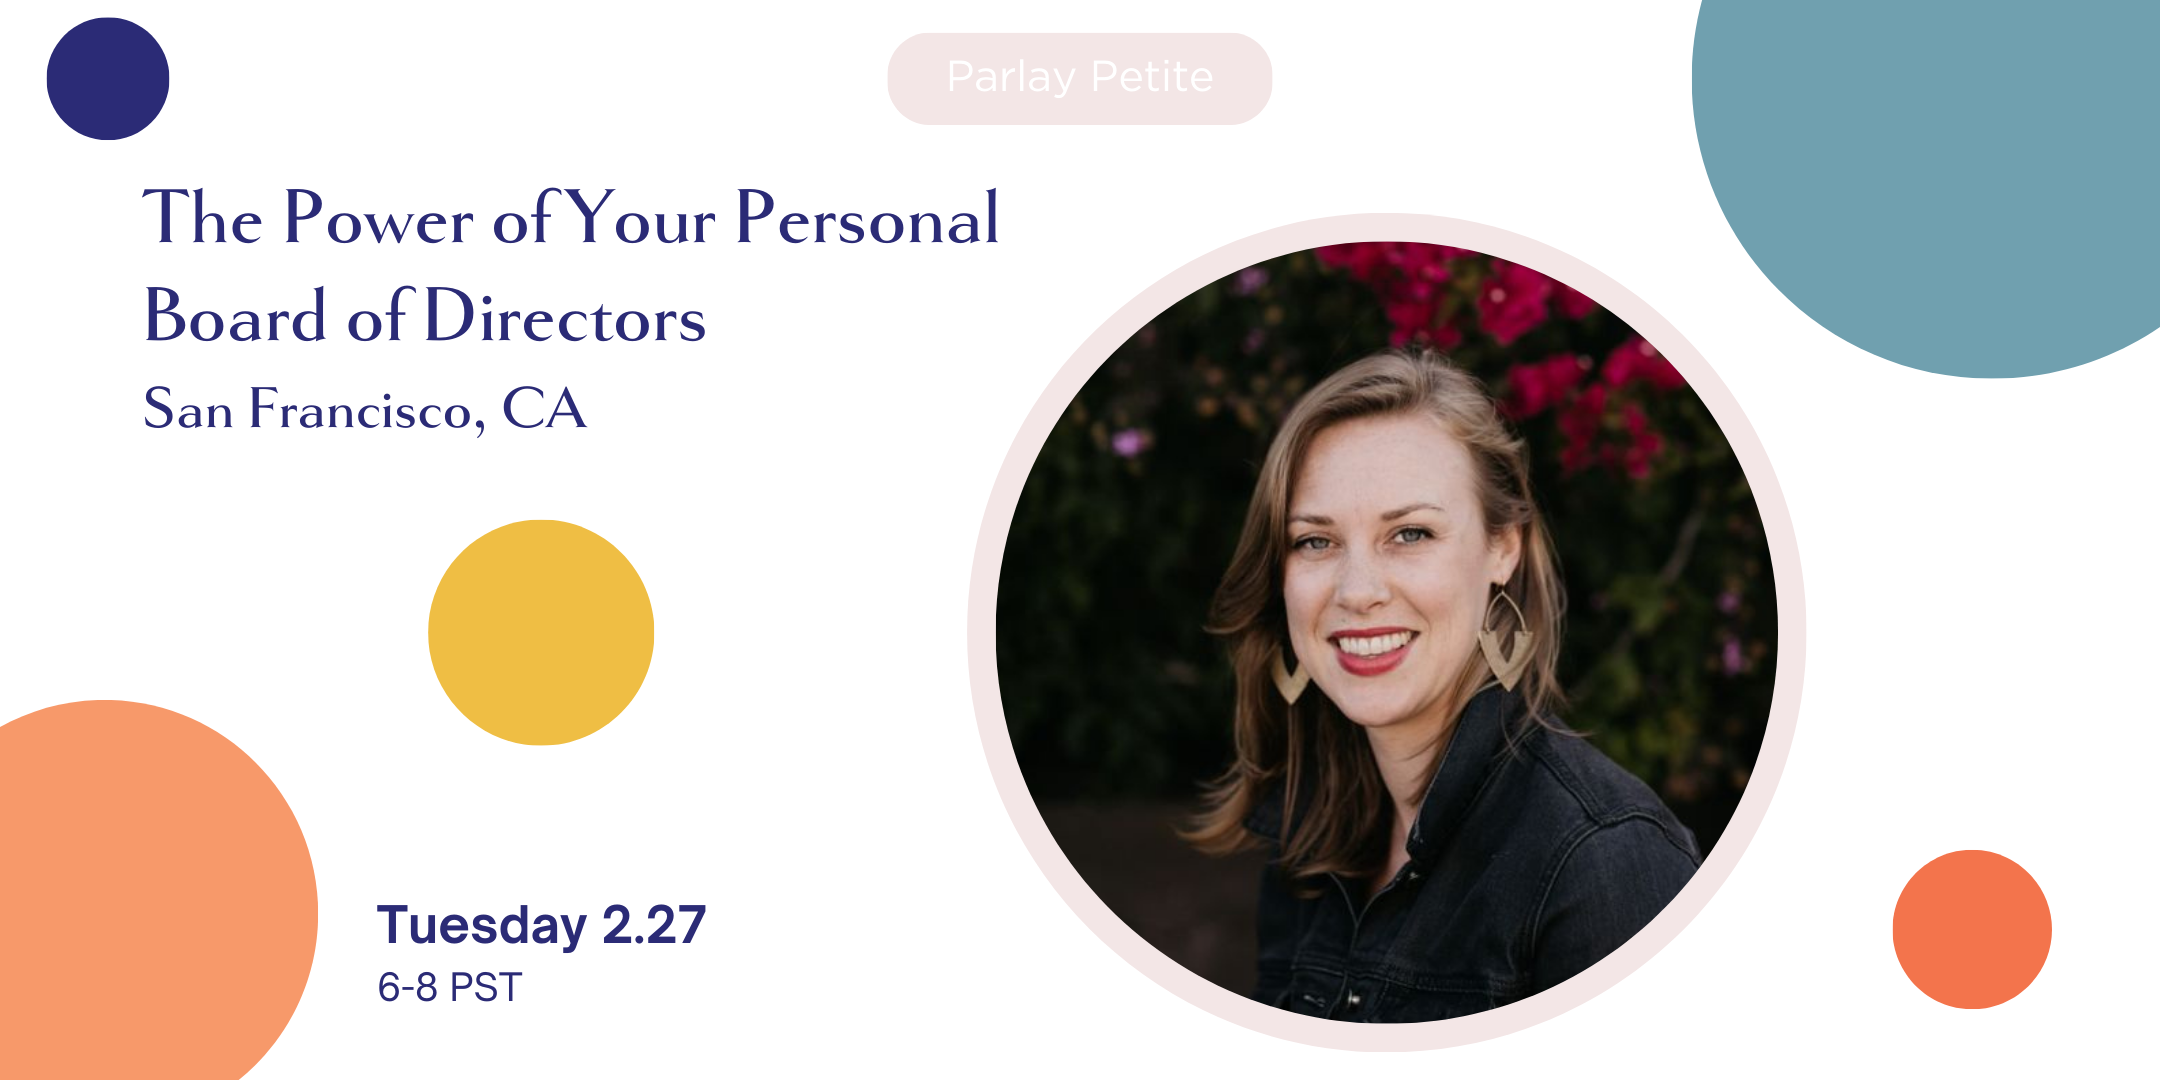 SF Petite: The Power of Your Personal Board of Directors